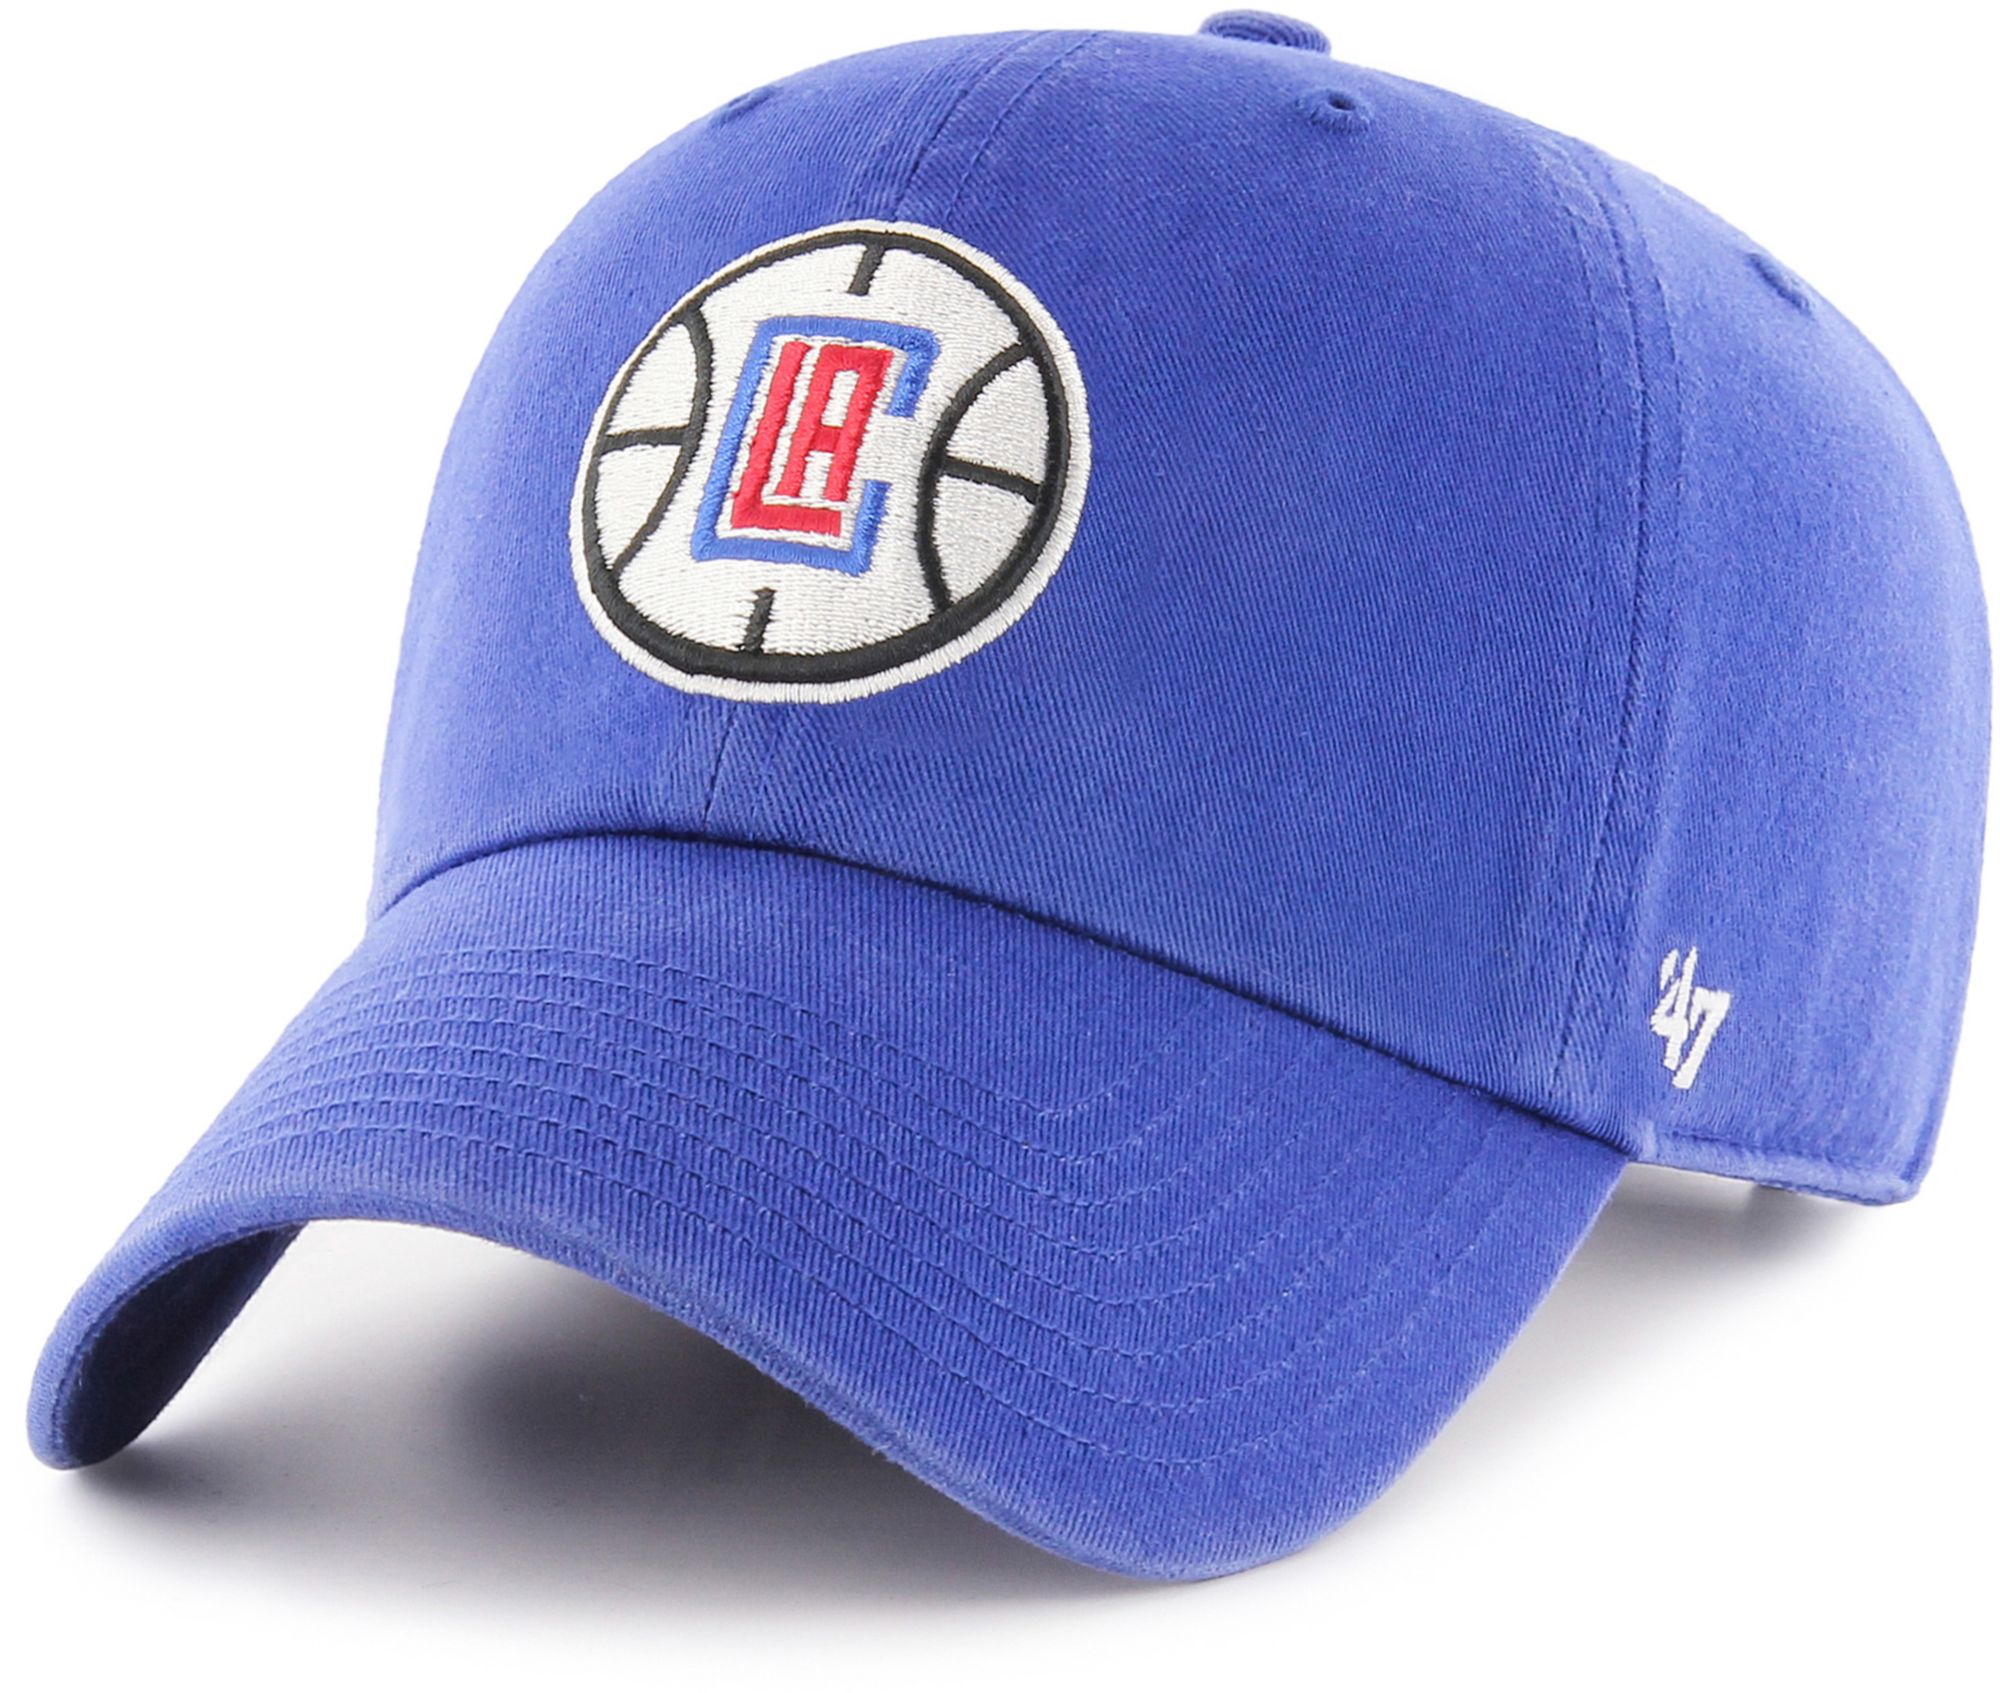 '47 Men's Los Angeles Clippers Royal Clean Up Adjustable Hat, Team